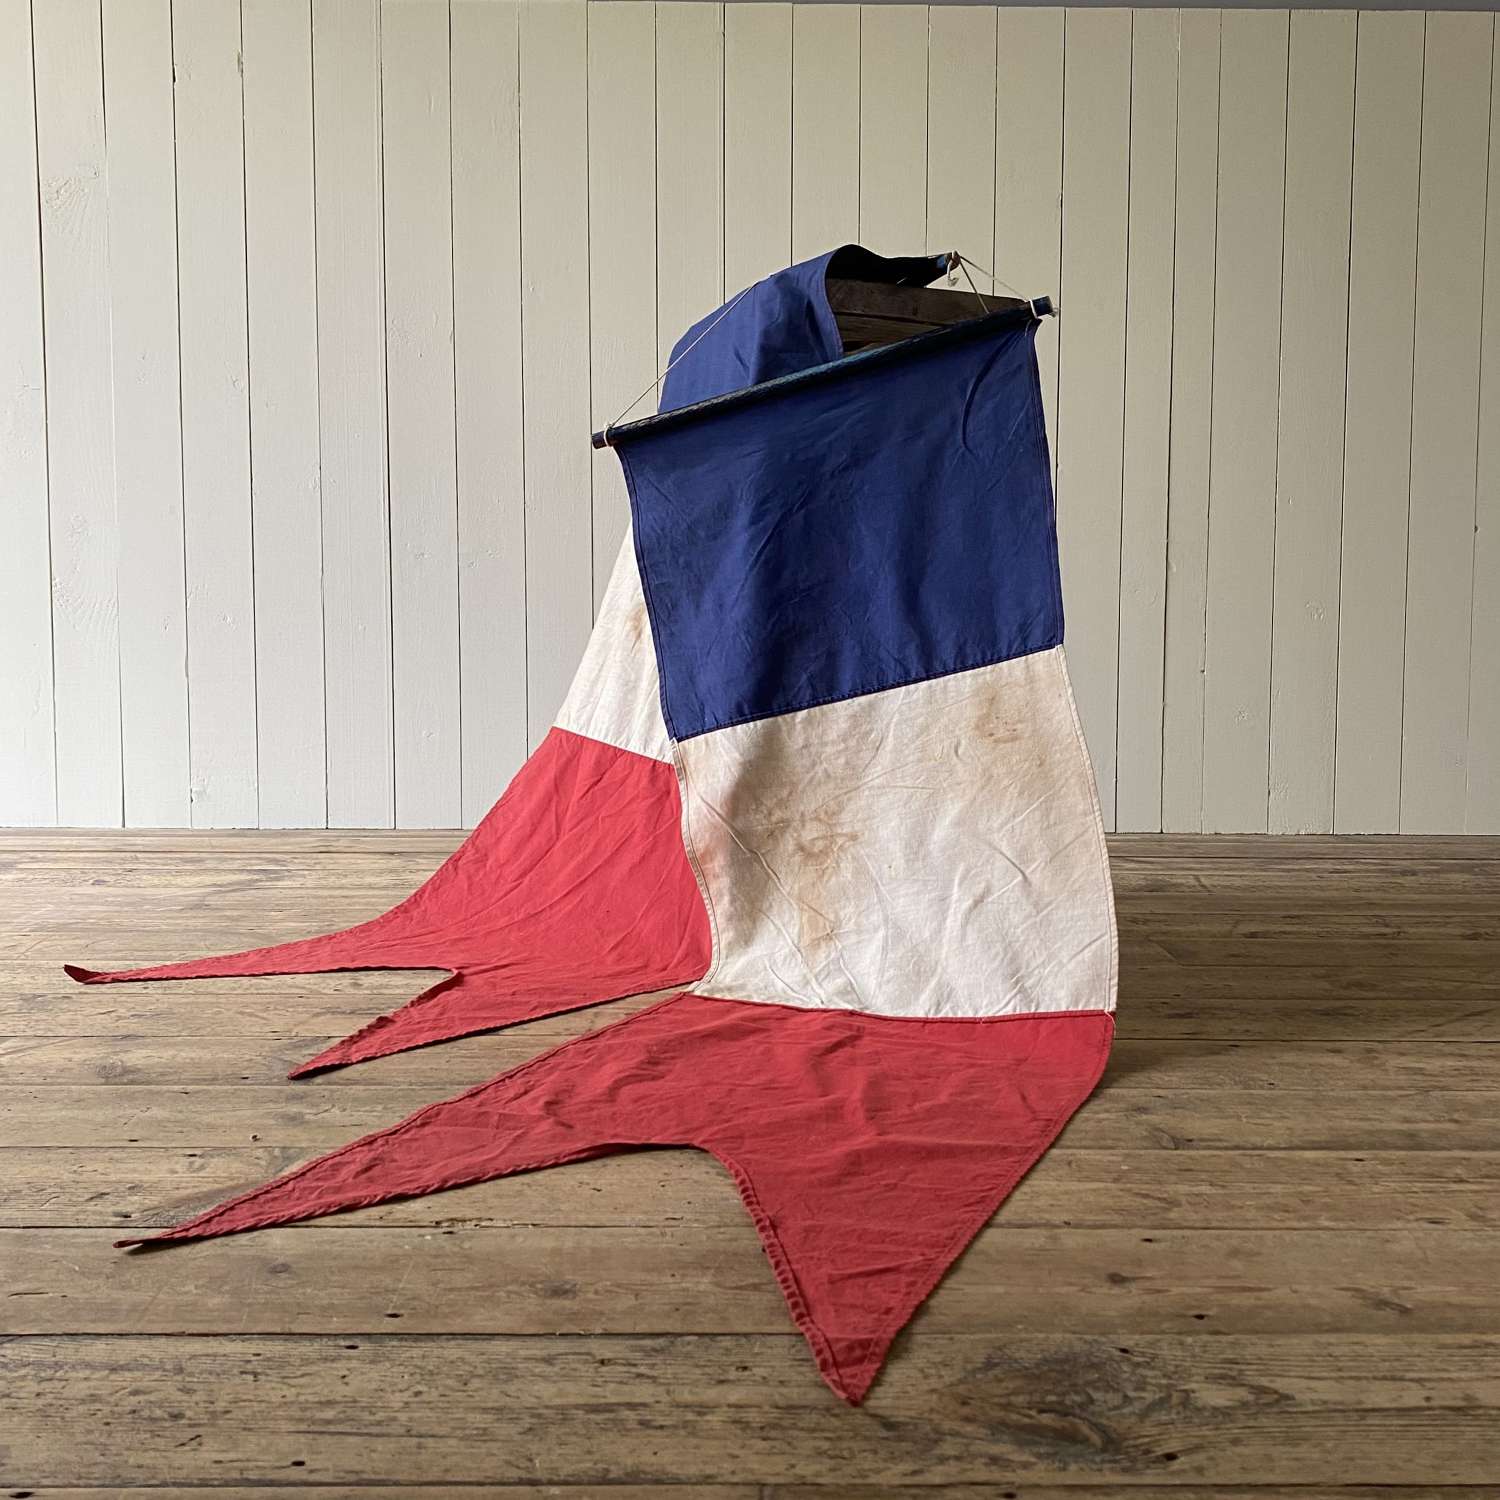 French hanging banners